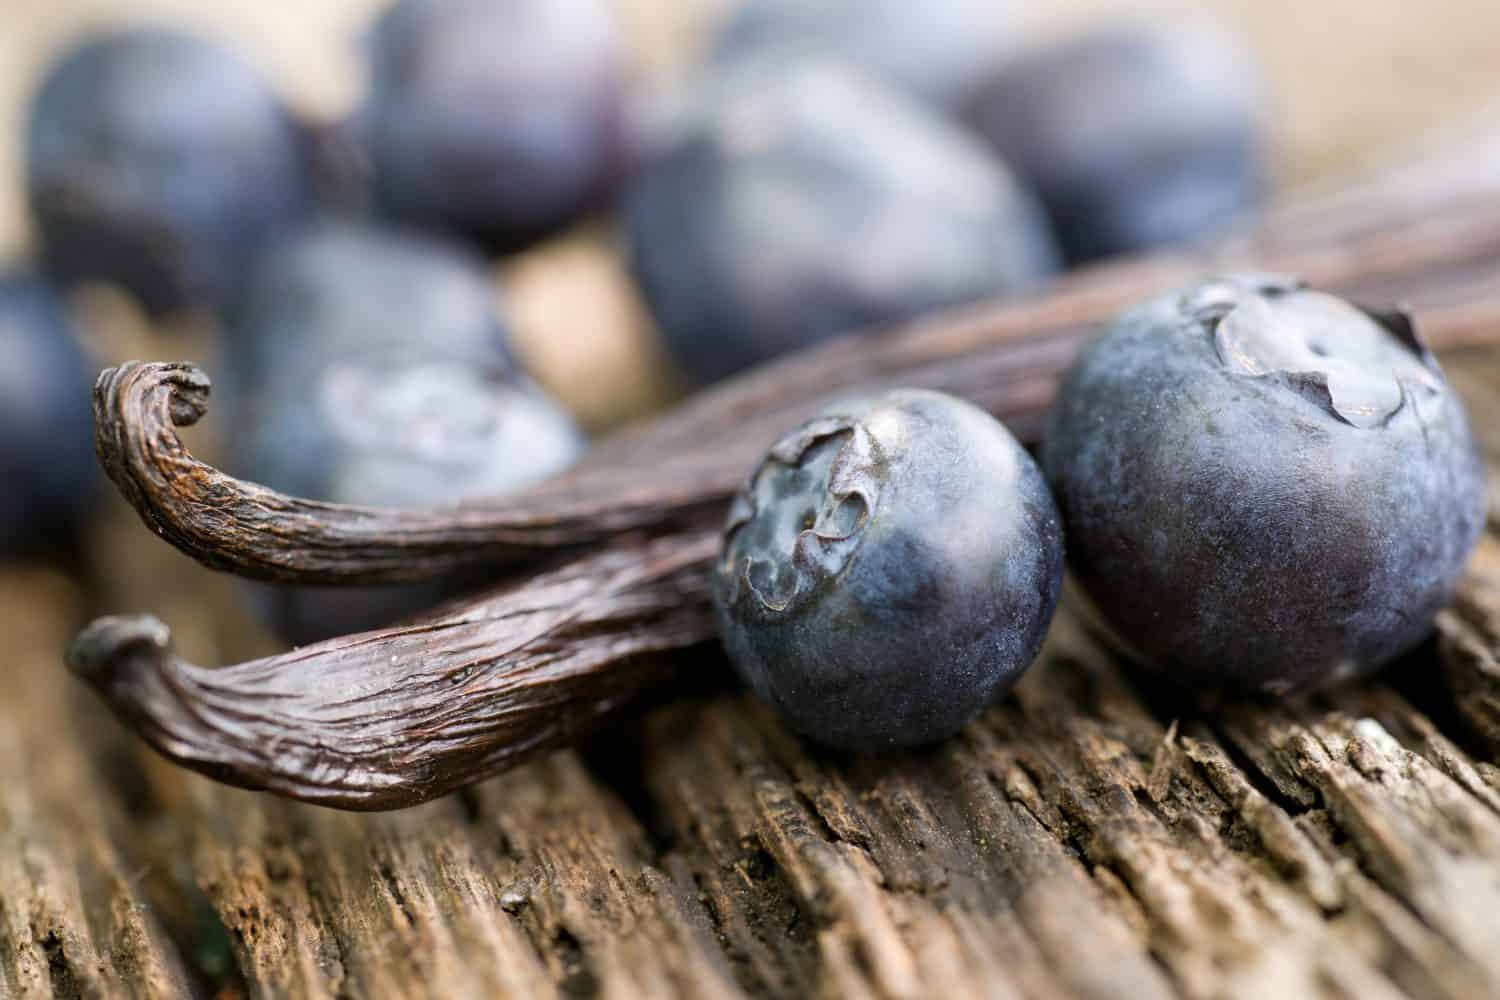 Vanilla beans and blueberries